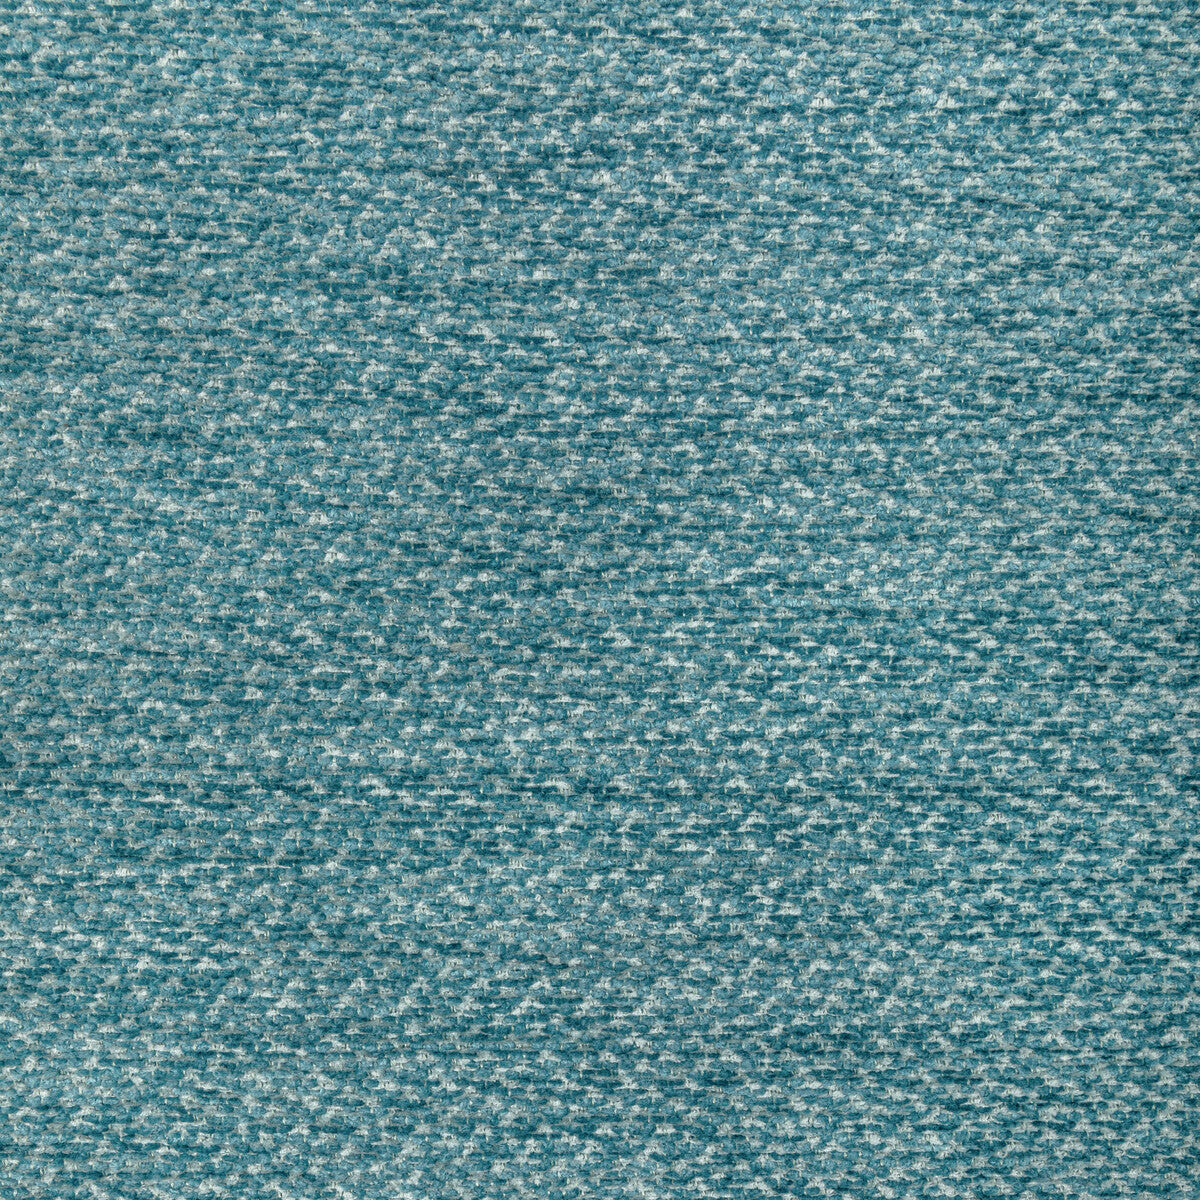 Sasson Texture fabric in teal color - pattern 8022122.13.0 - by Brunschwig &amp; Fils in the Chambery Textures III collection